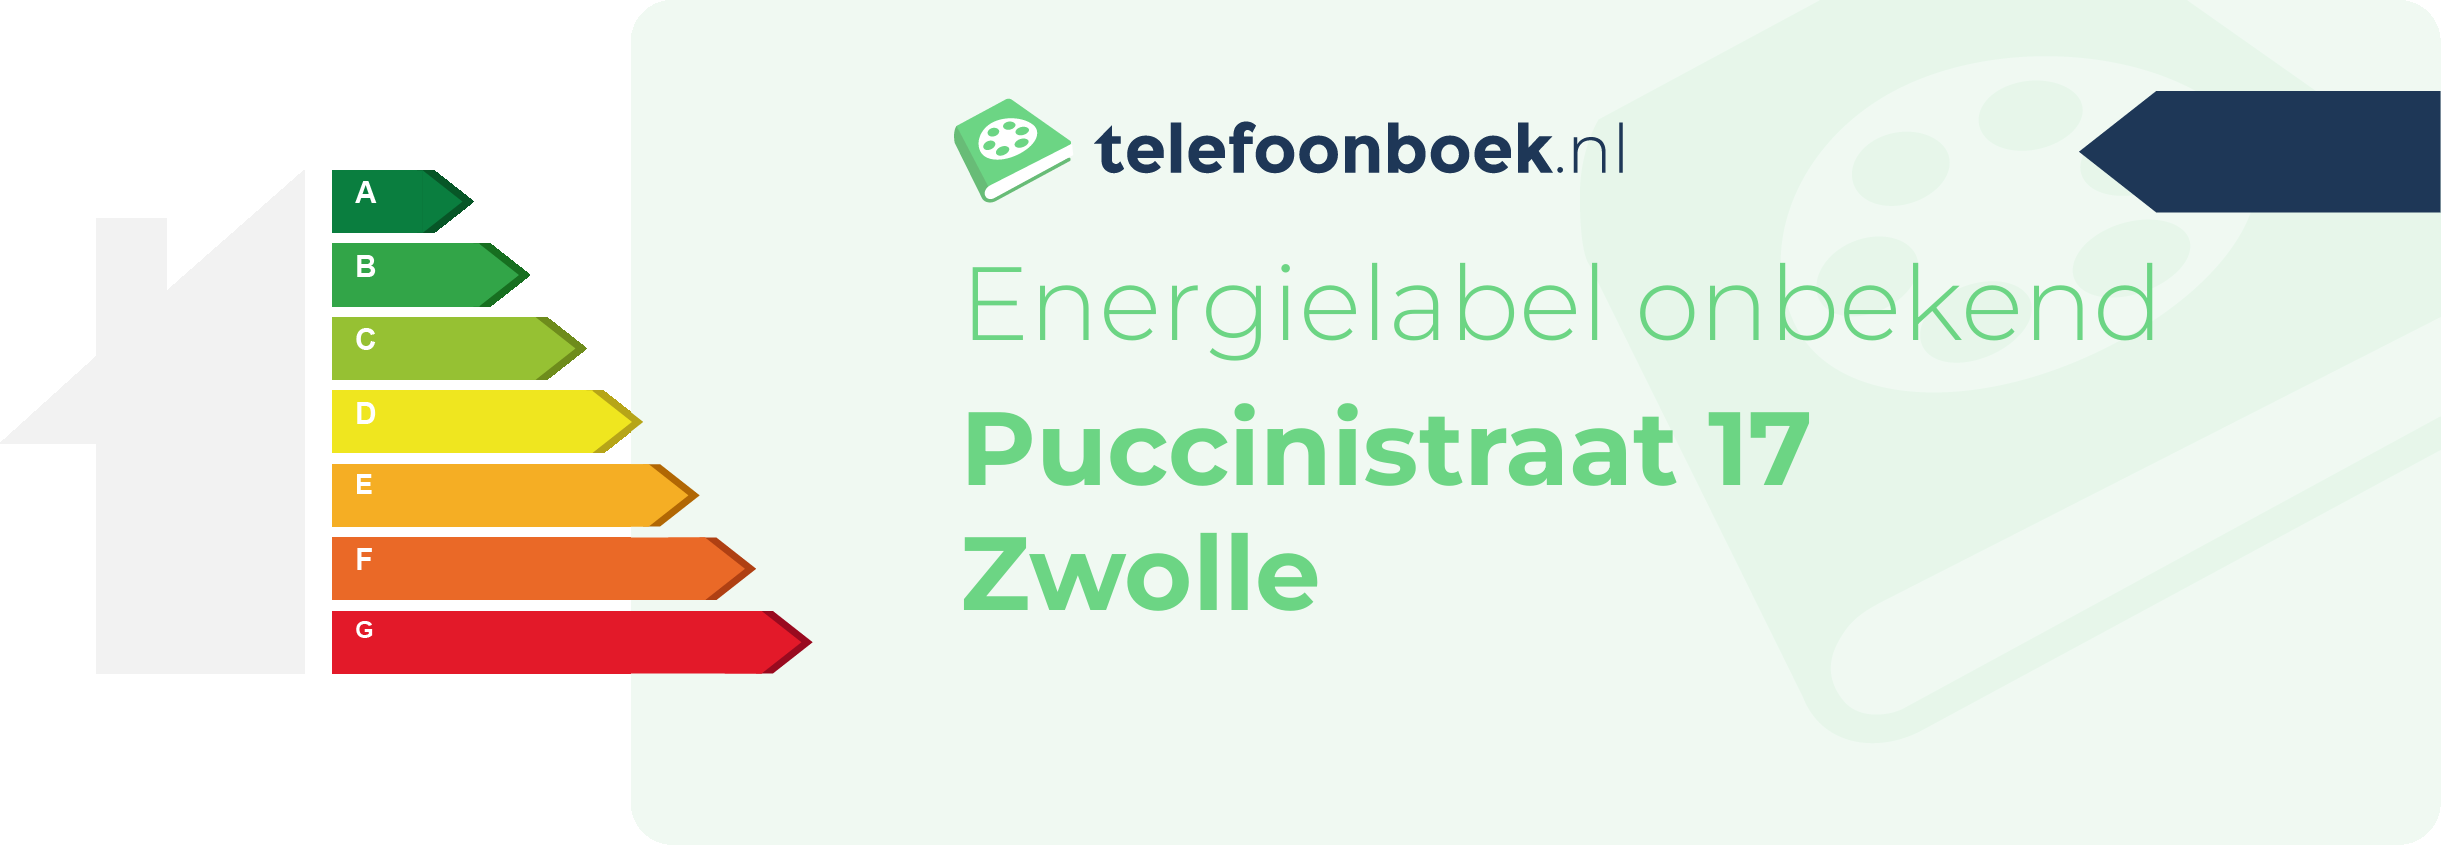 Energielabel Puccinistraat 17 Zwolle